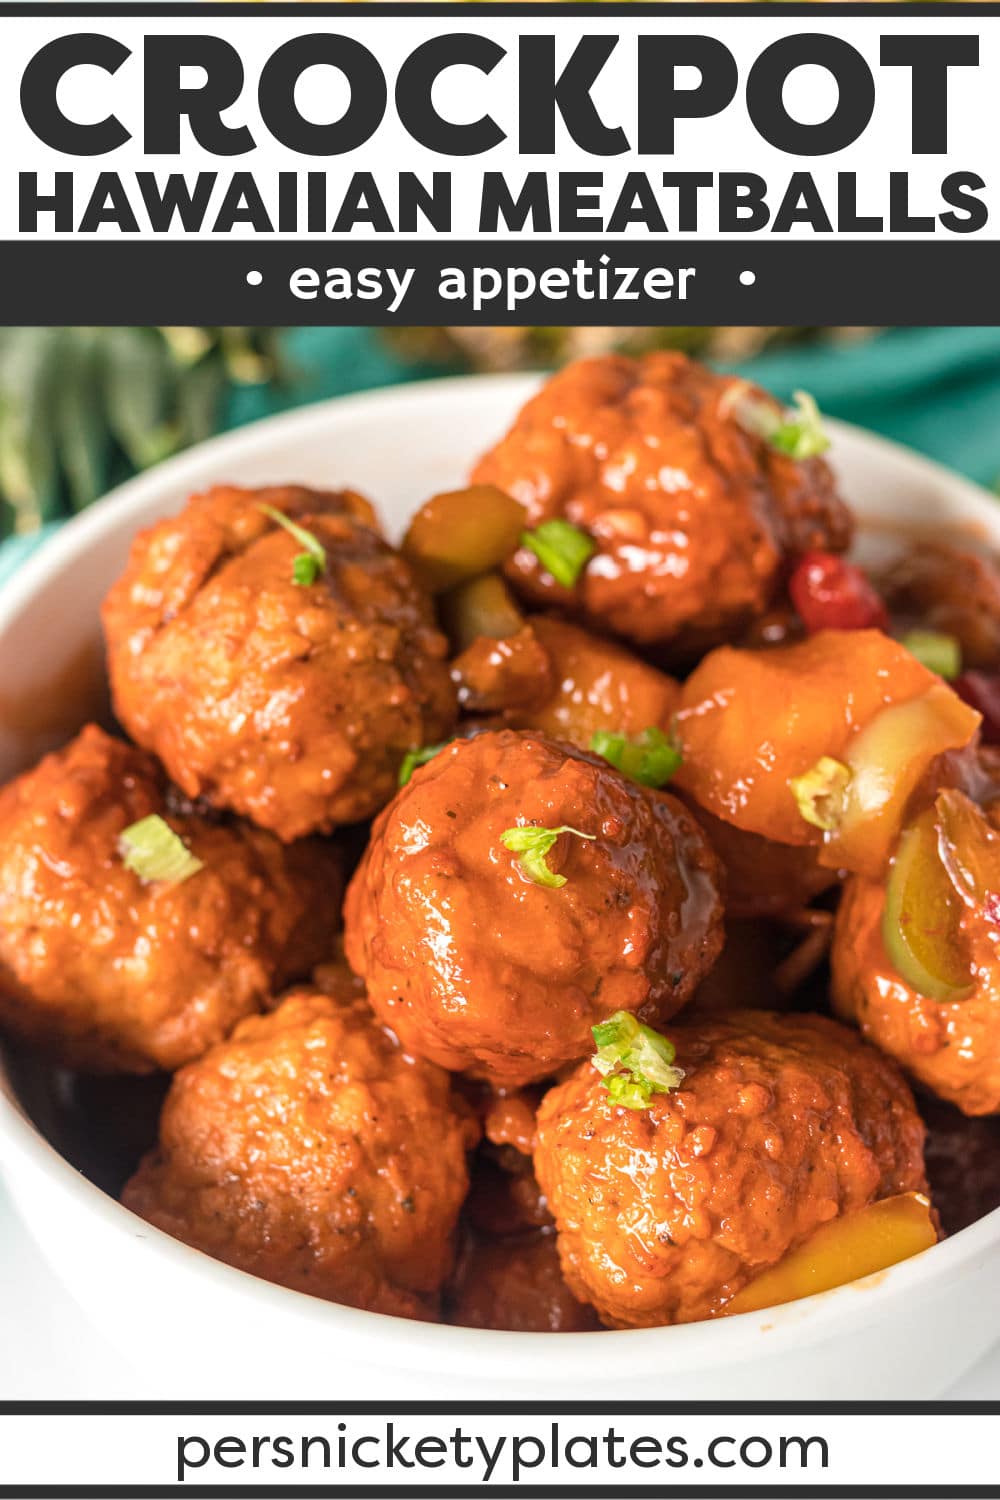 Slow cooker Hawaiian meatballs are made with frozen meatballs, canned pineapple, peppers, onions, and a sweet and tangy sauce. This dump-and-go crockpot recipe makes the perfect appetizer or a main dish that the whole family will love! | www.persnicketyplates.com